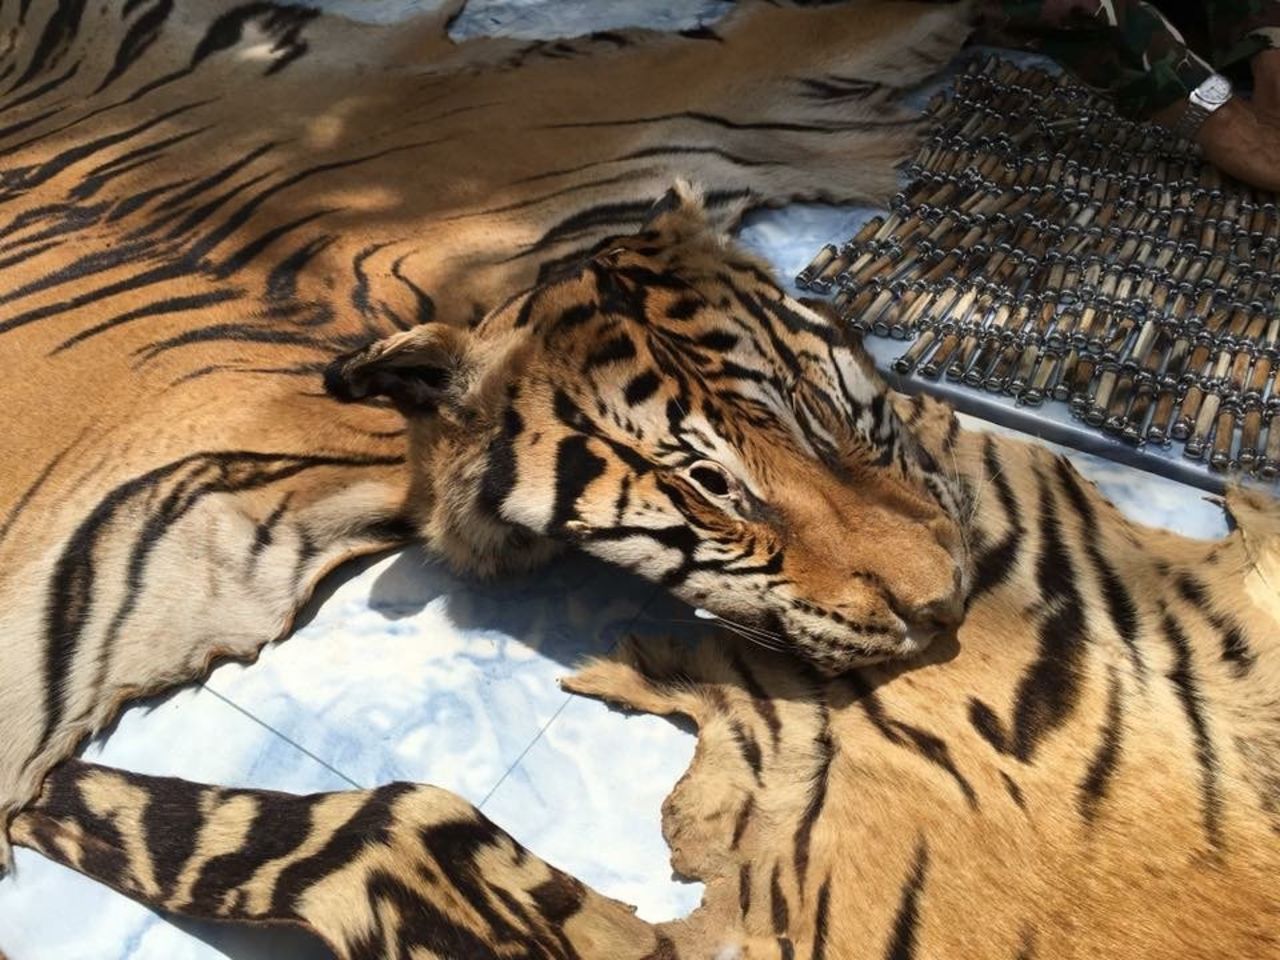 National Parks and Wildlife officers display the skins from two tigers that were seized from a truck leaving the temple, June 2.